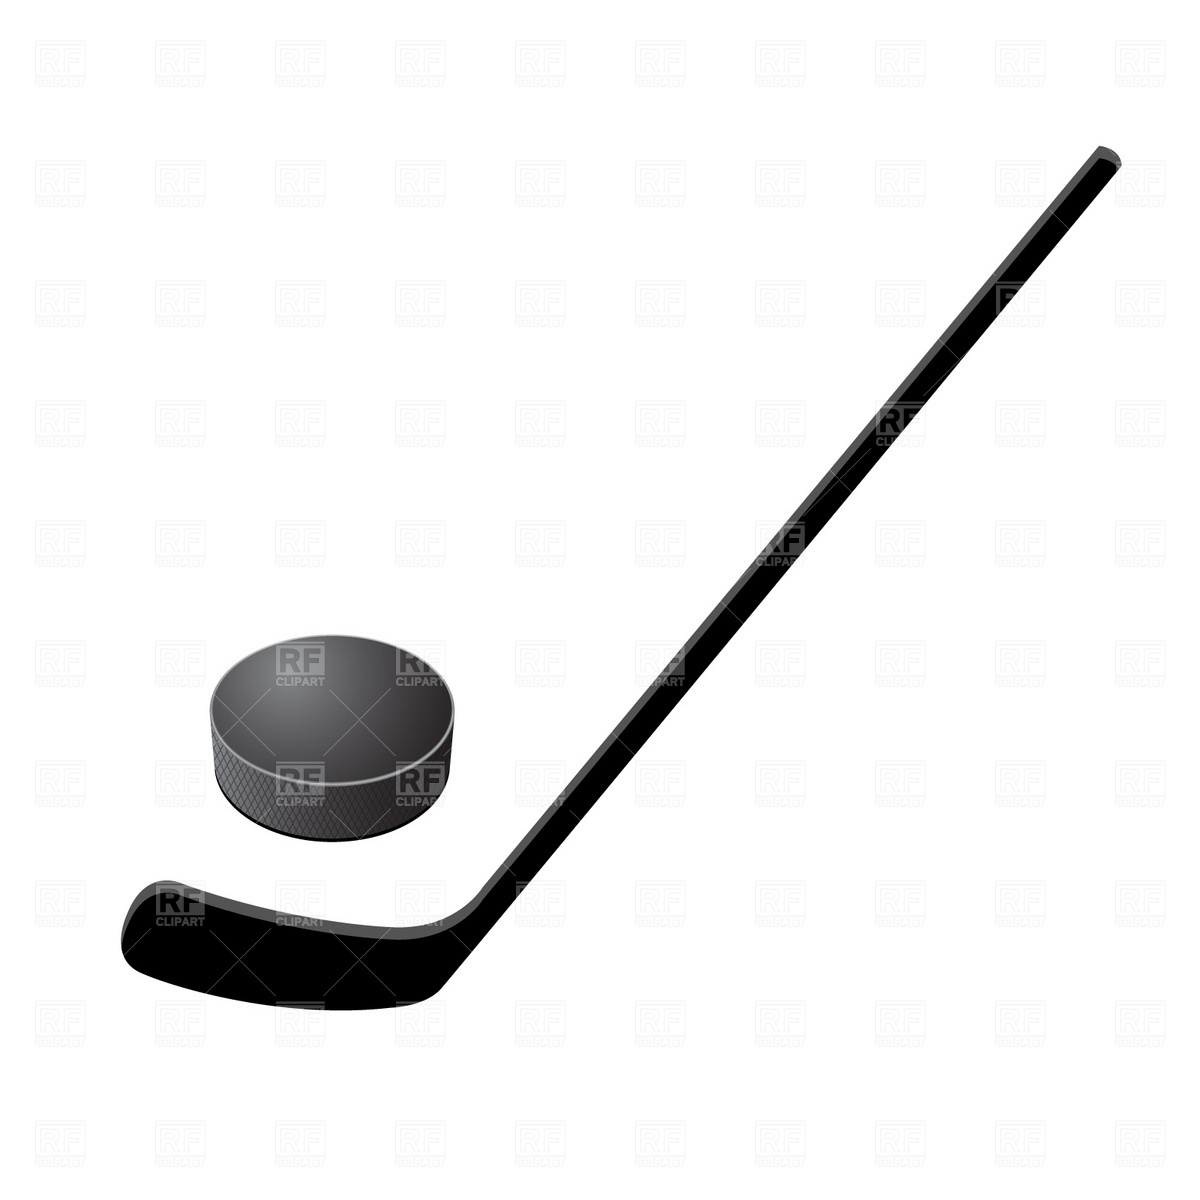 Hockey Stick And Puck Clipart 9 